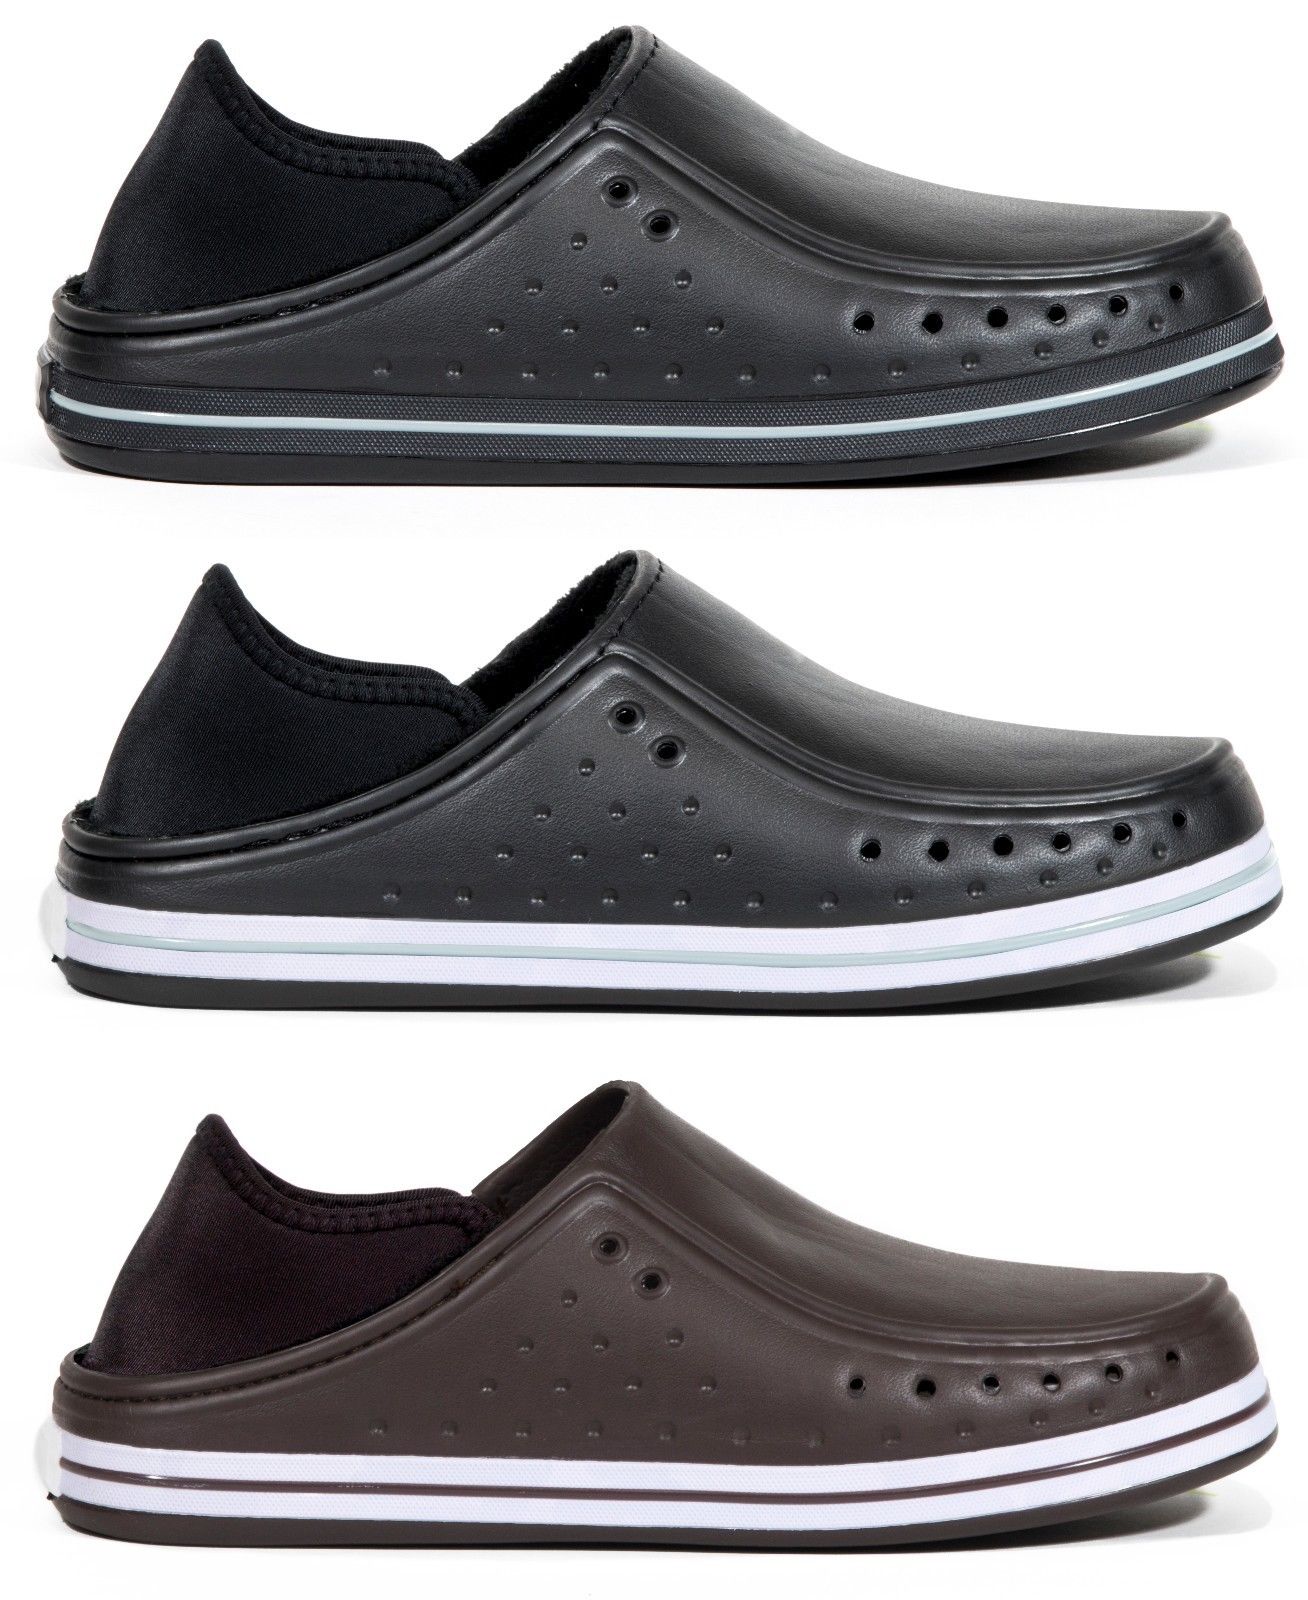 Men’s Casual Water Resistant Slip On Boat Shoes Only $5.99 SHIPPED!